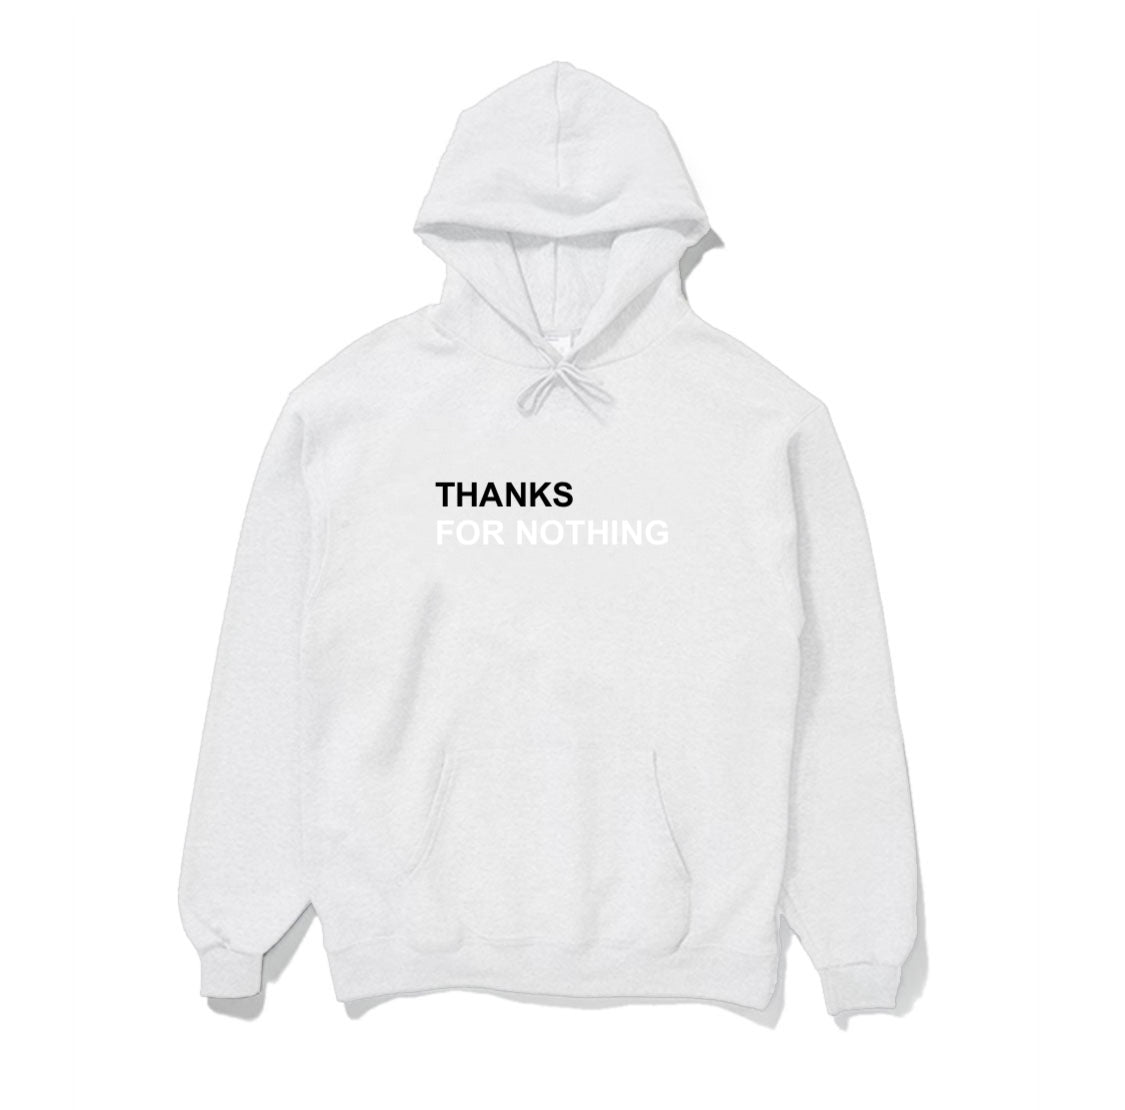 THANKS FOR NOTHING HOODIE